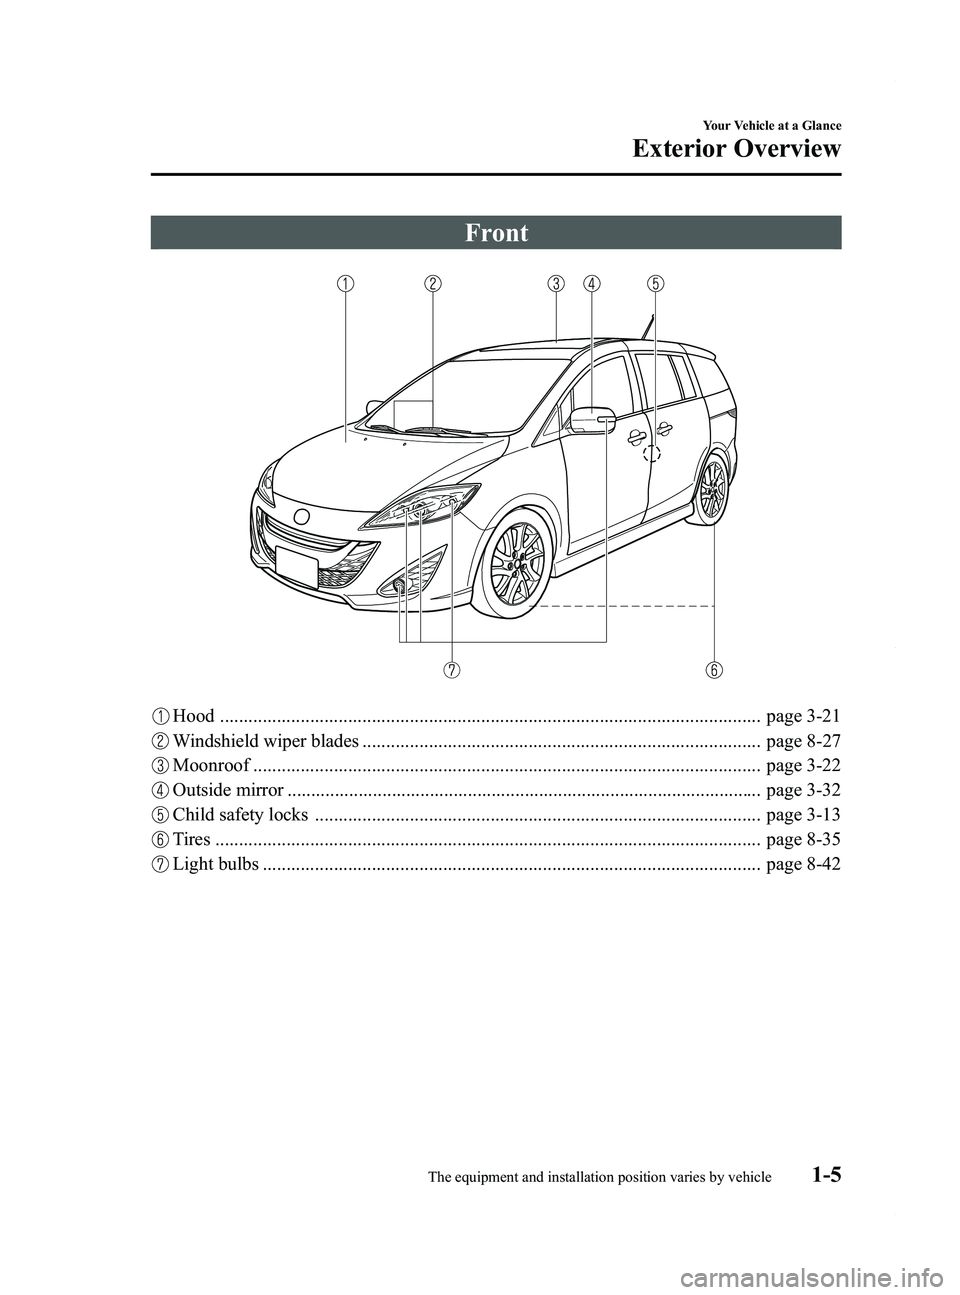 MAZDA MODEL 5 2014  Owners Manual Black plate (11,1)
Front
Hood .................................................................................................................. page 3-21
Windshield wiper blades .....................